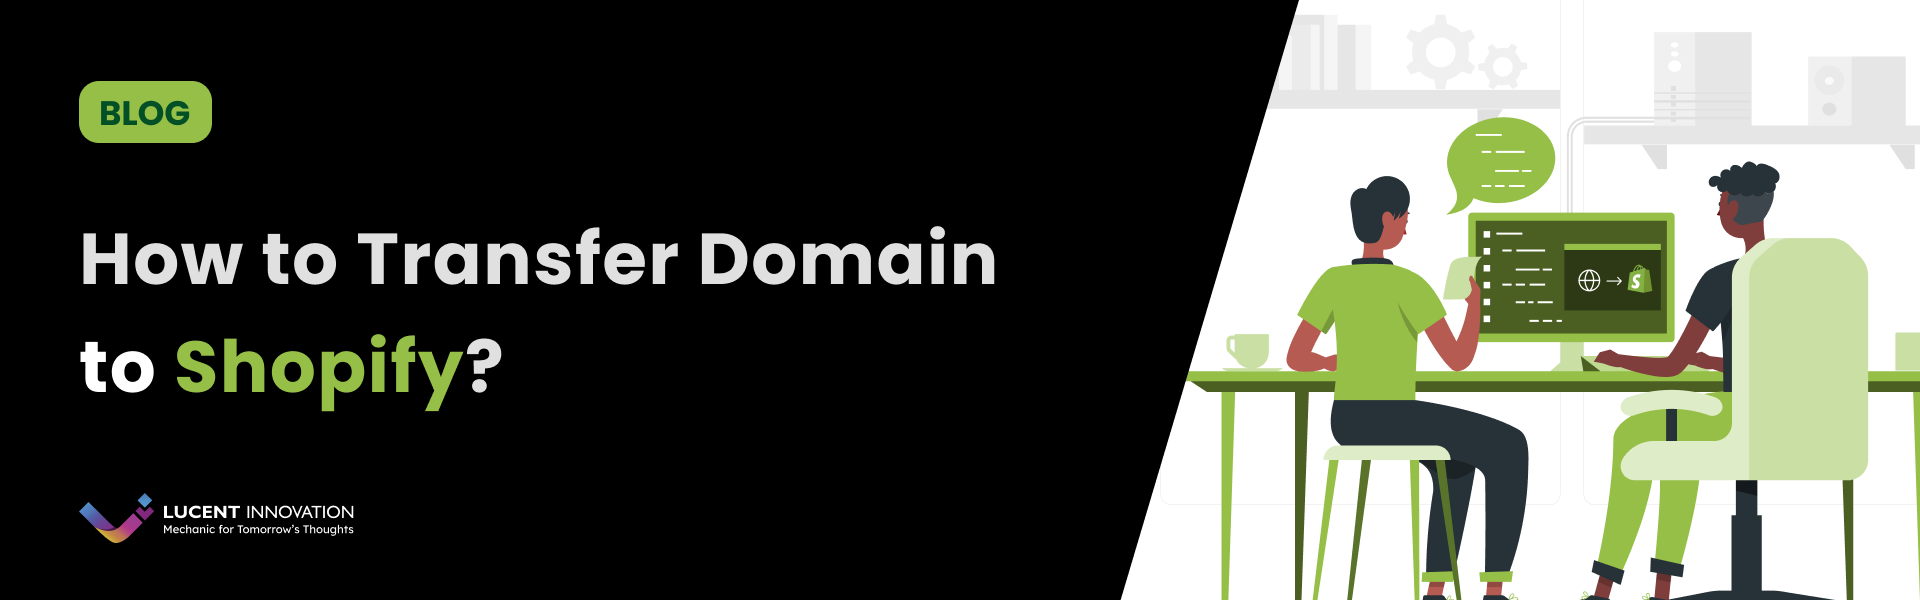 How to Transfer Domain to Shopify?